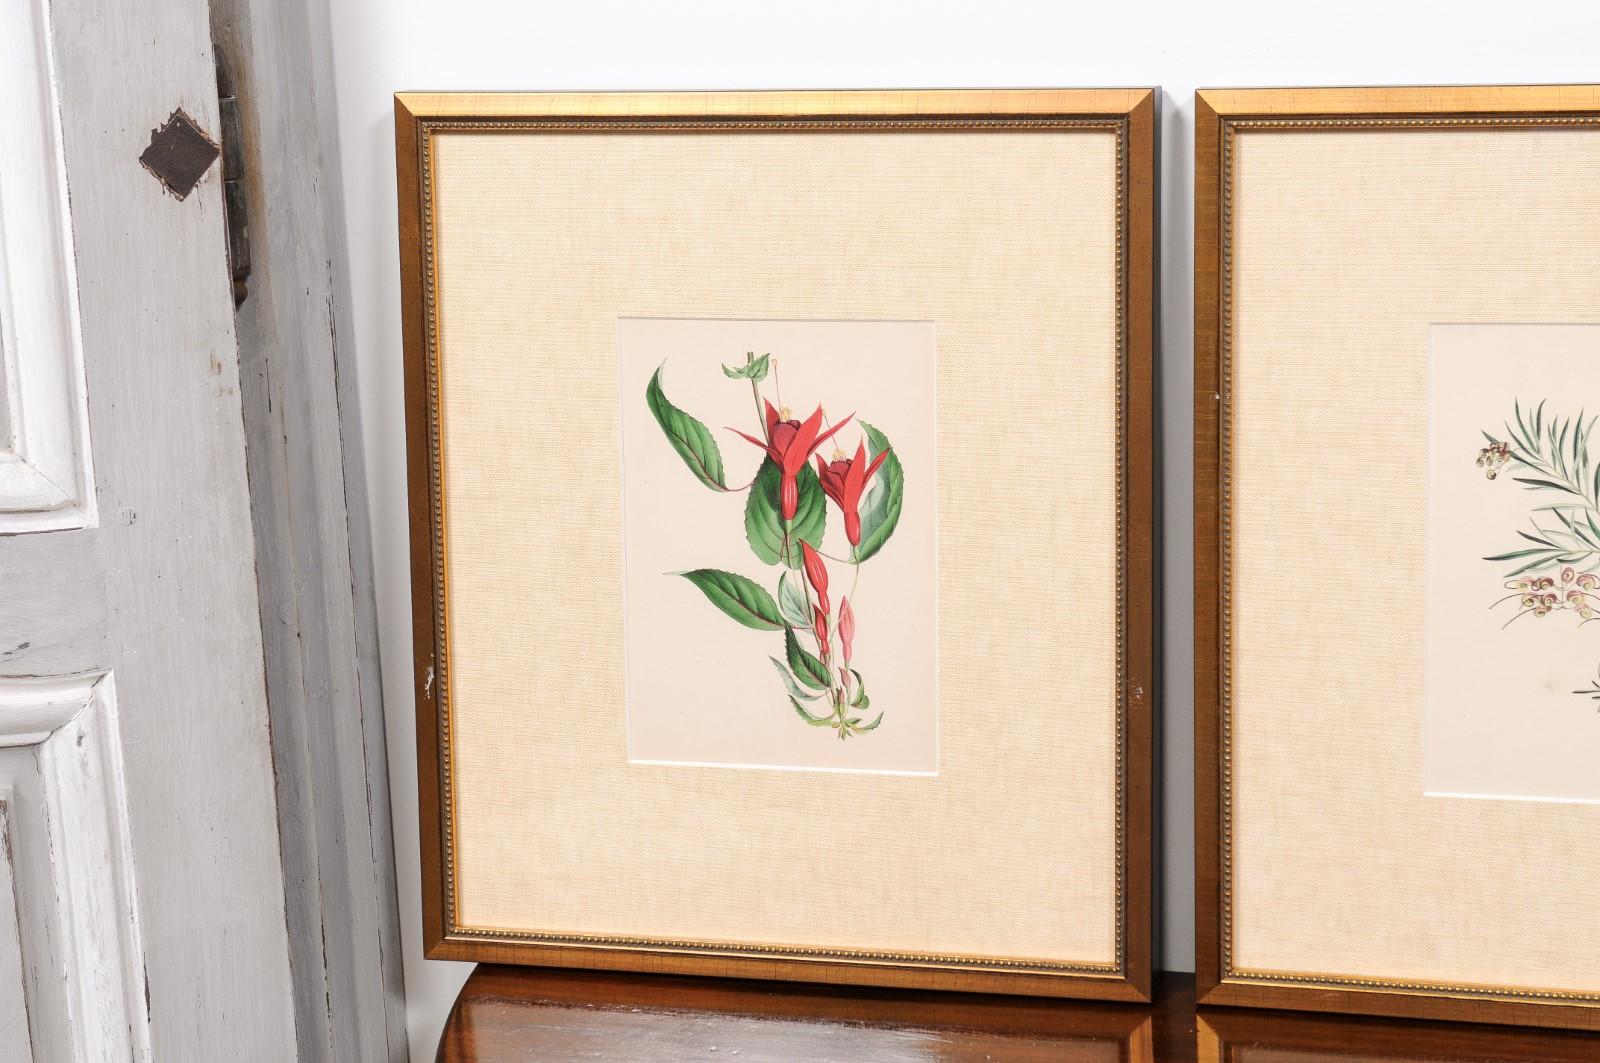  Victorian Floral Prints from The Museum of Flowers by Mary Elizabeth Rosenberg For Sale 1